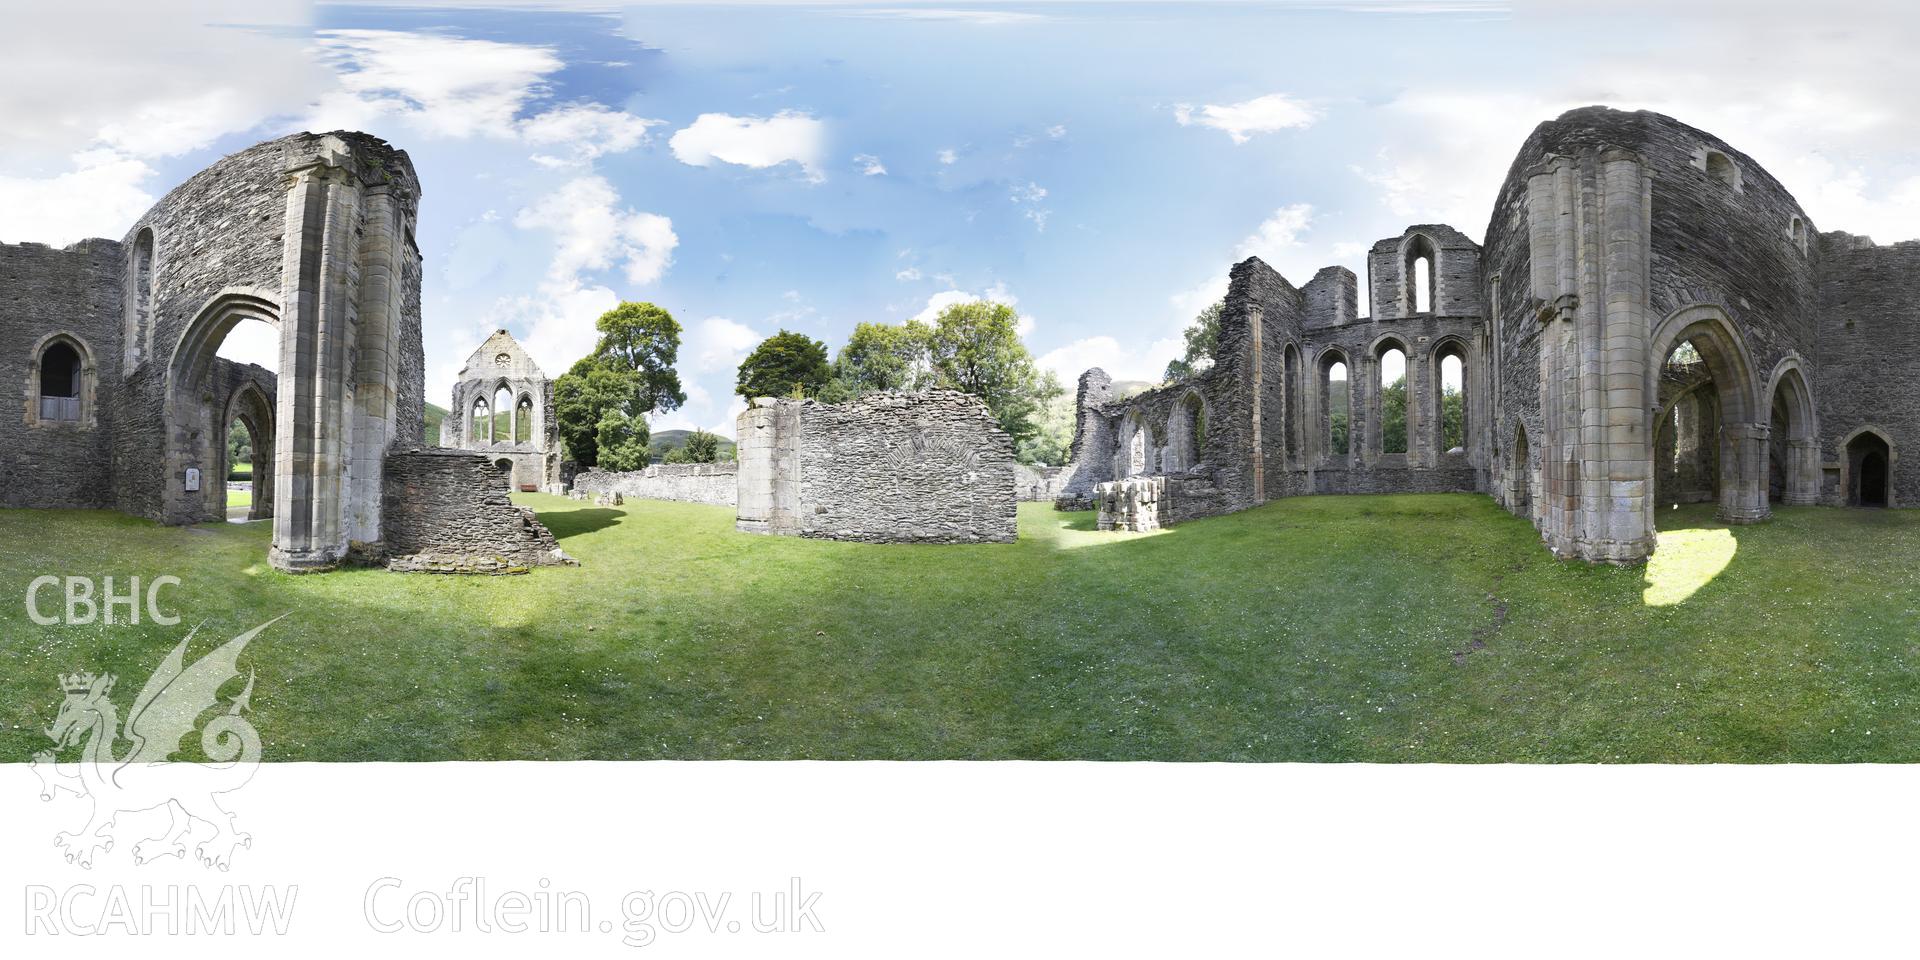 Reduced resolution .tiff file of stitched images in the east end of the abbey church at Valle Crucis Abbey, carried out by Sue Fielding and Rita Singer, July 2017. Produced through European Travellers to Wales project.